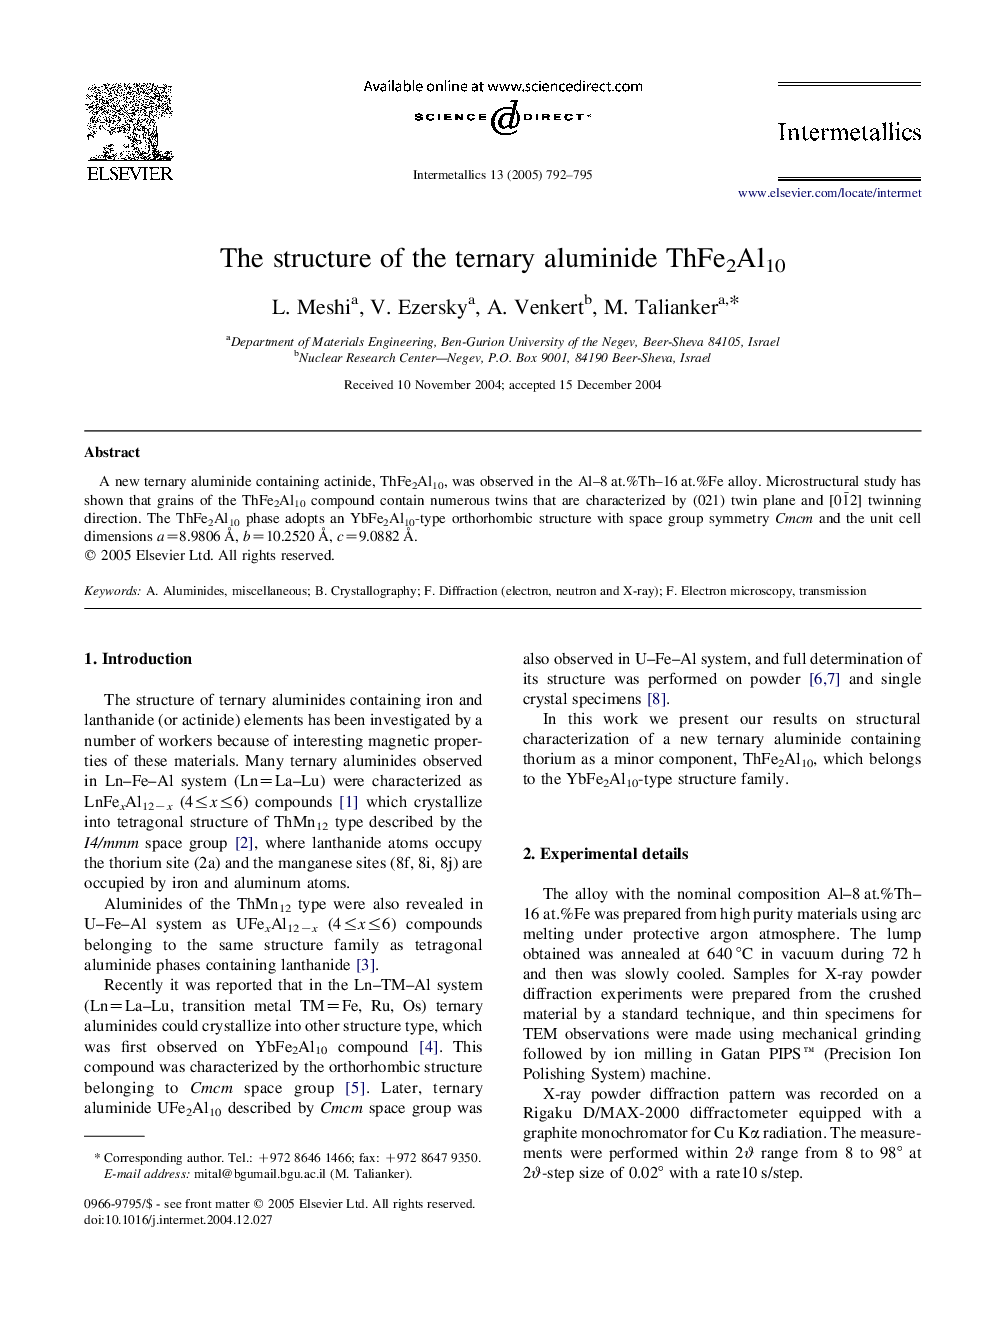 The structure of the ternary aluminide ThFe2Al10